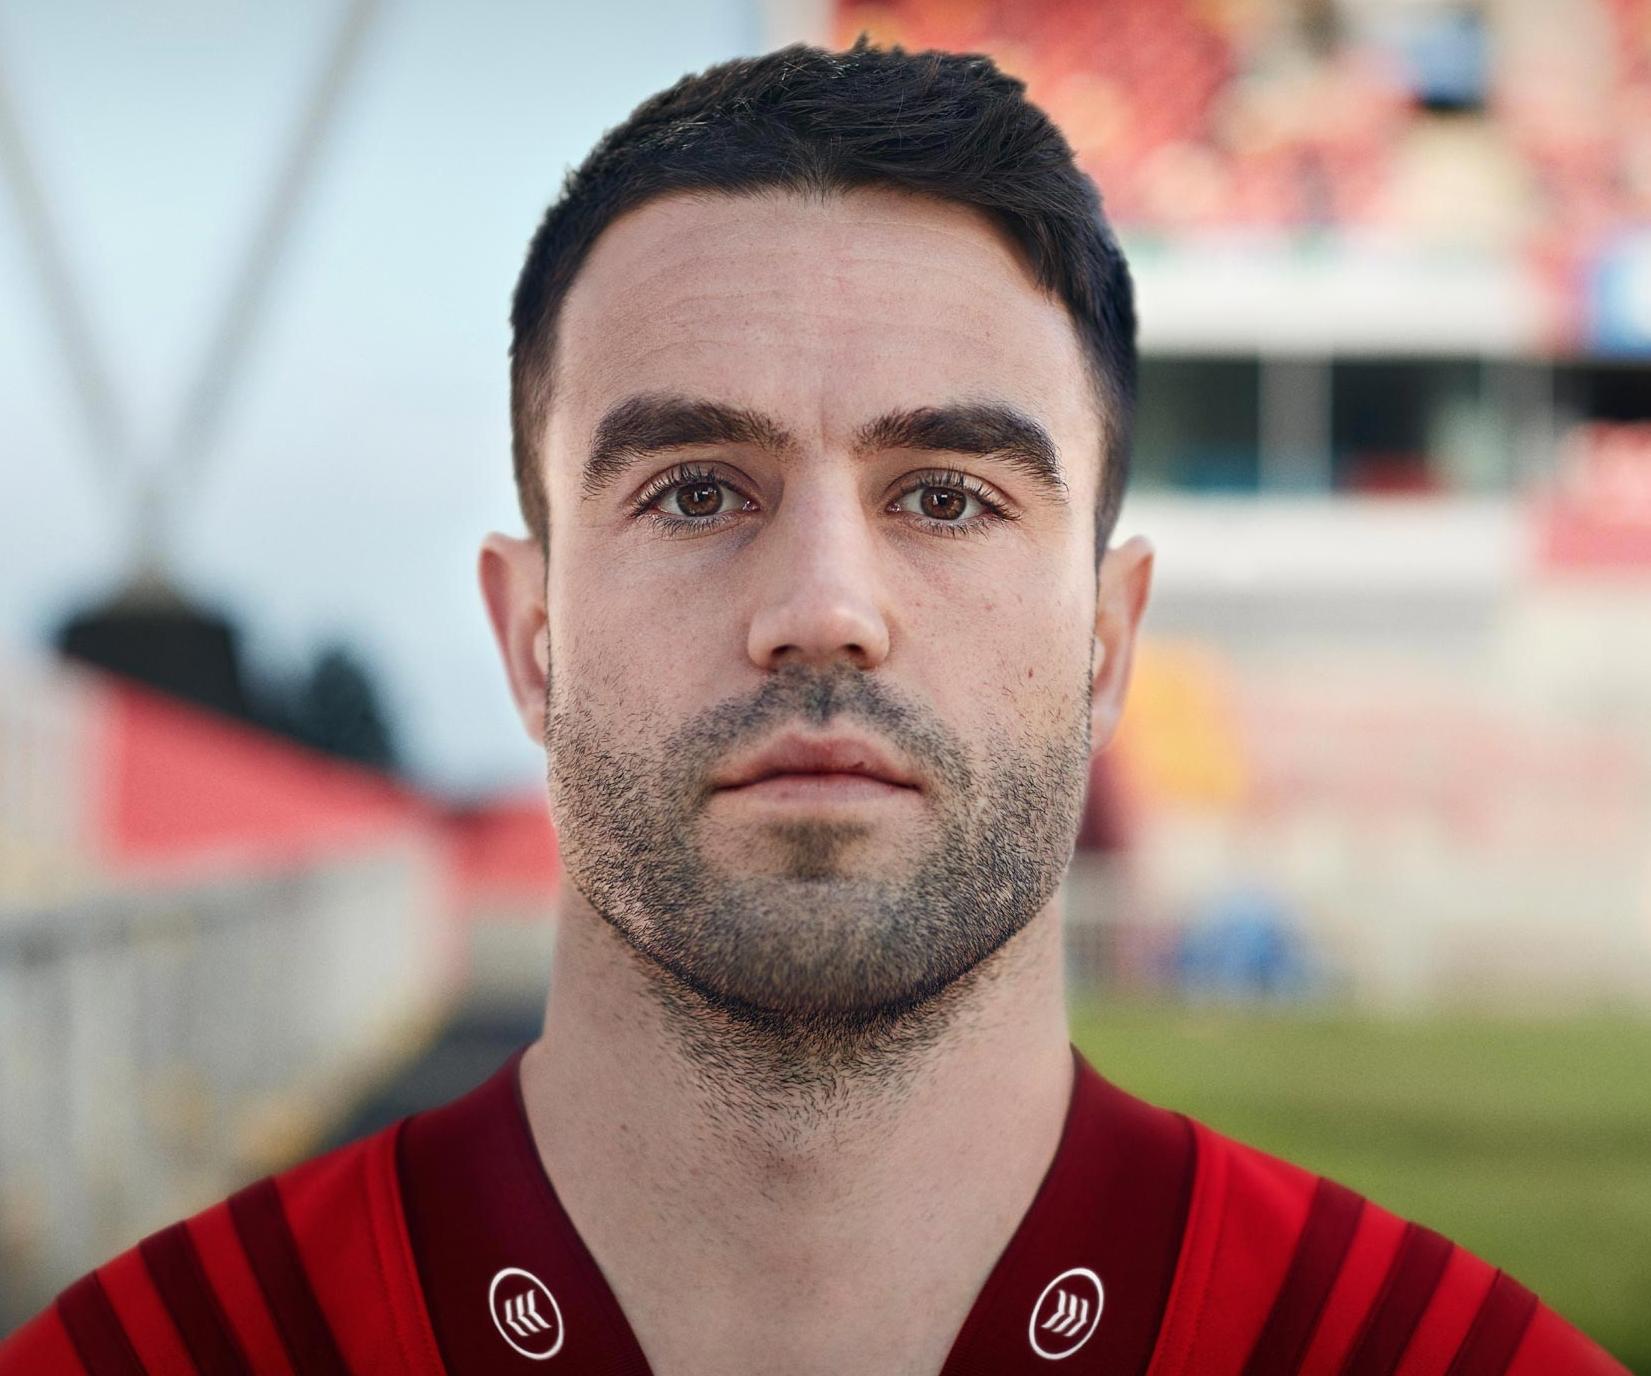 Conor Murray <br> Bank of Ireland Rugby <br> Agency : TBWA <br> 1 of 4